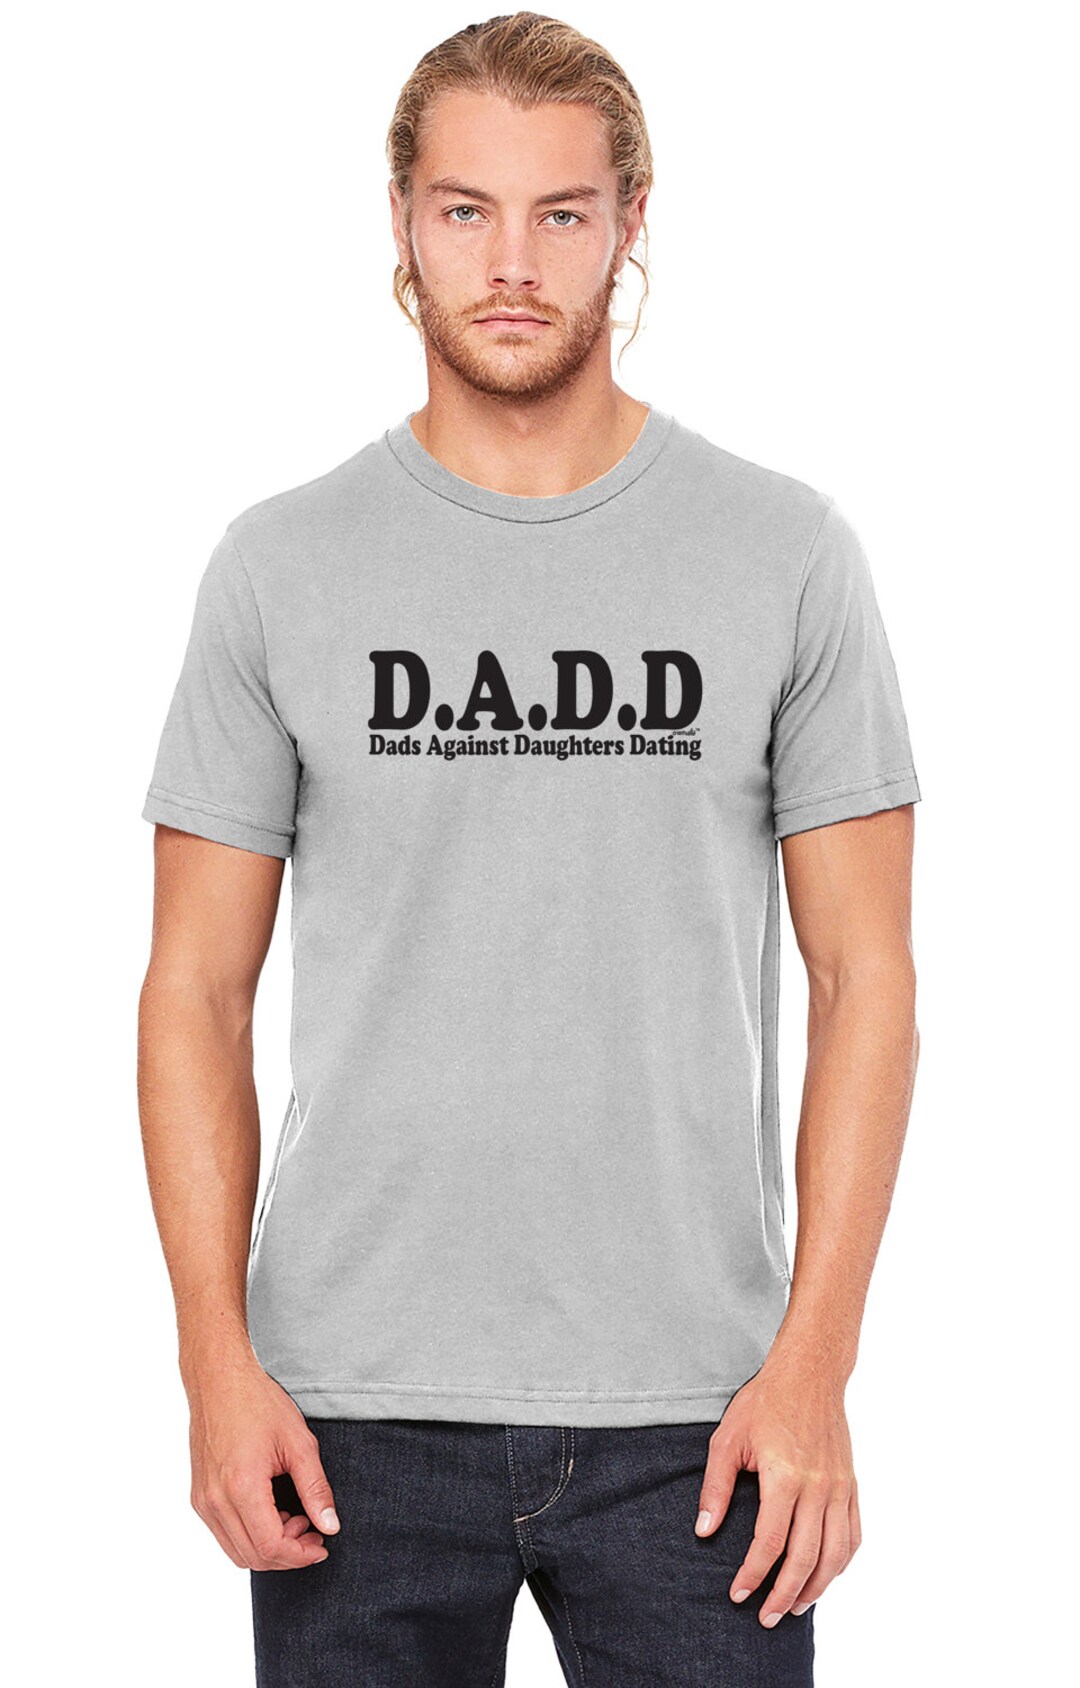 D.A.D.D Dads Against Daughters Dating Tshirt - Etsy